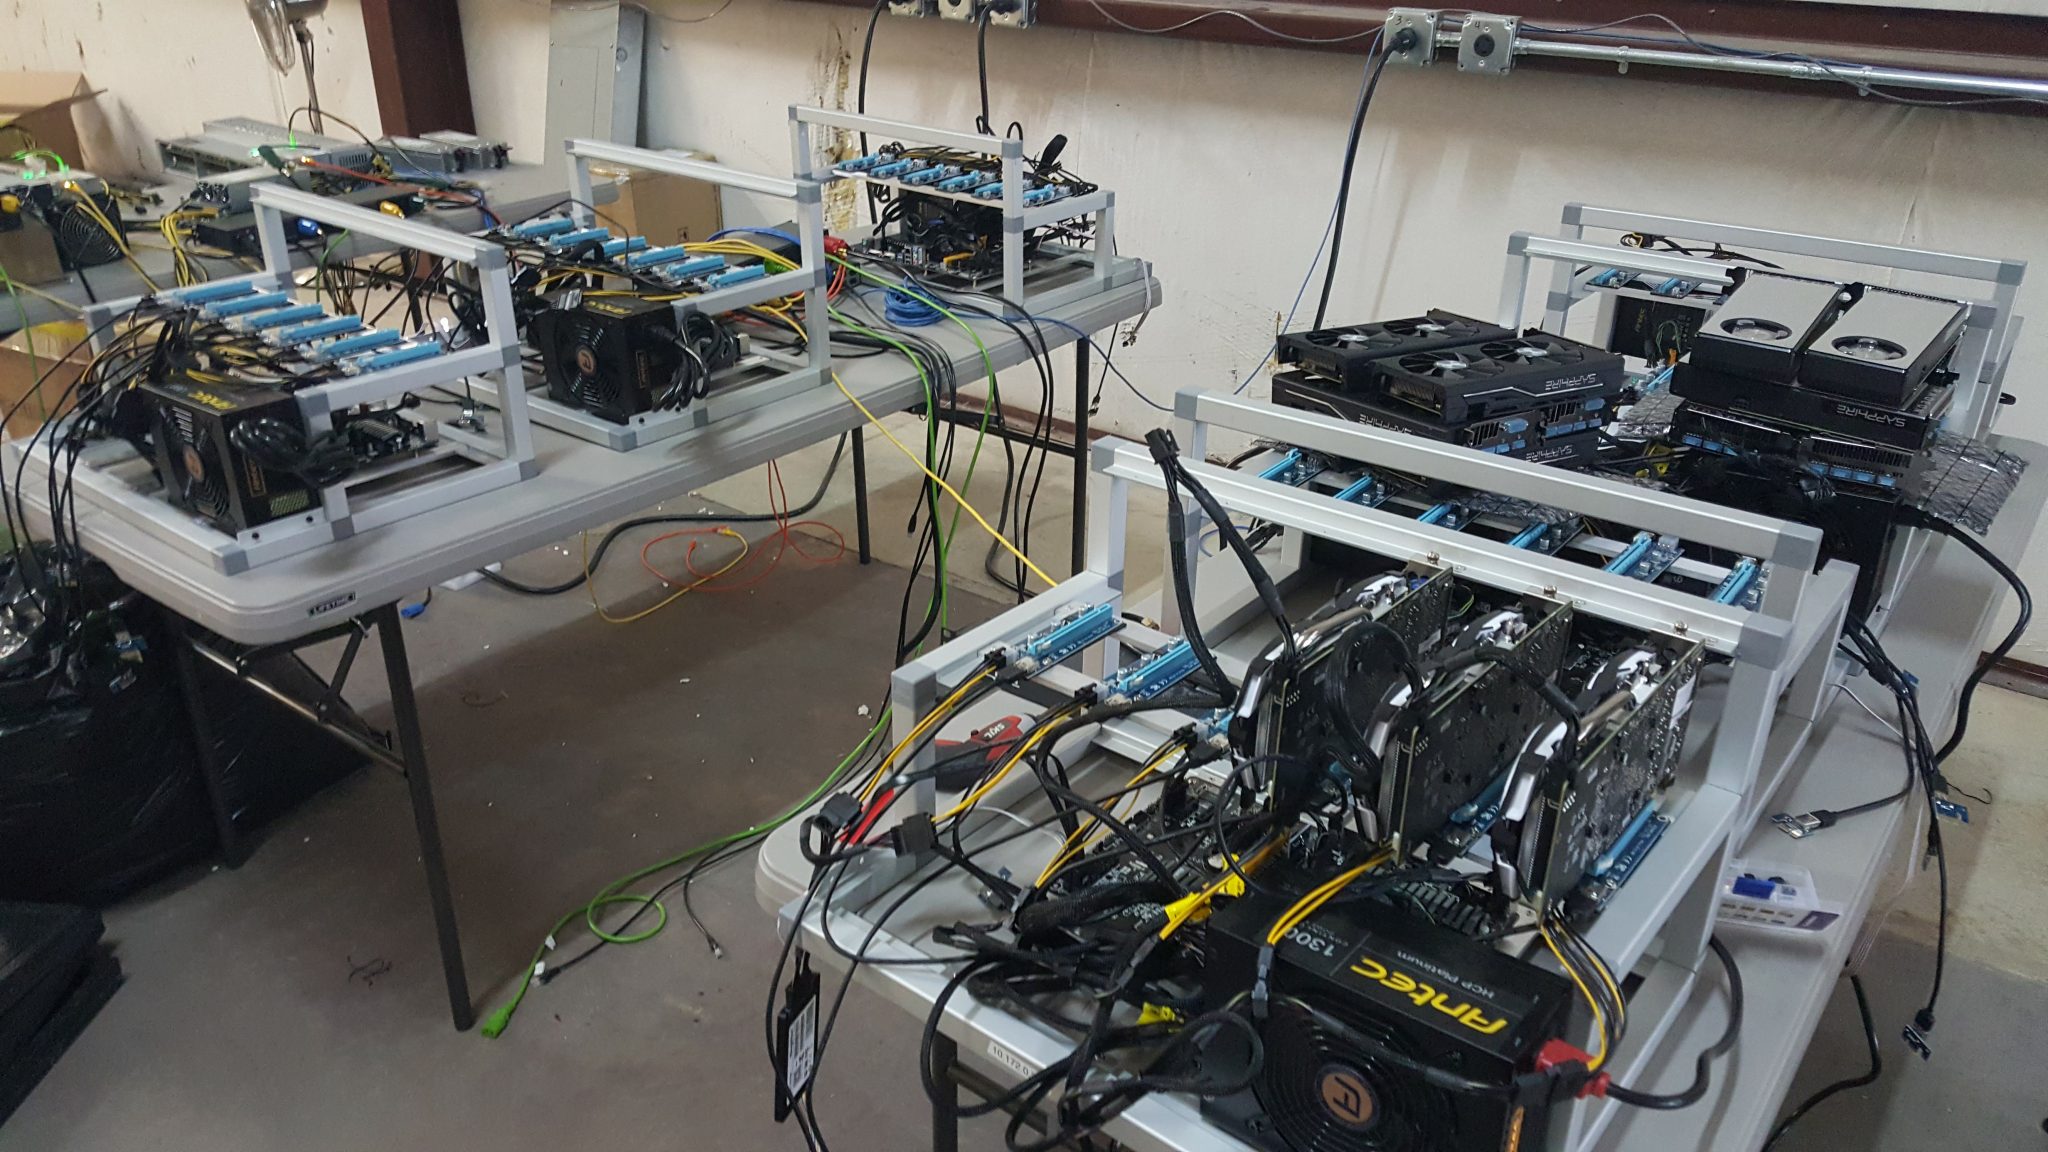 Where Have All The GPU's Gone? Cryptocurrency Mining! - Stephen Foskett, Pack Rat